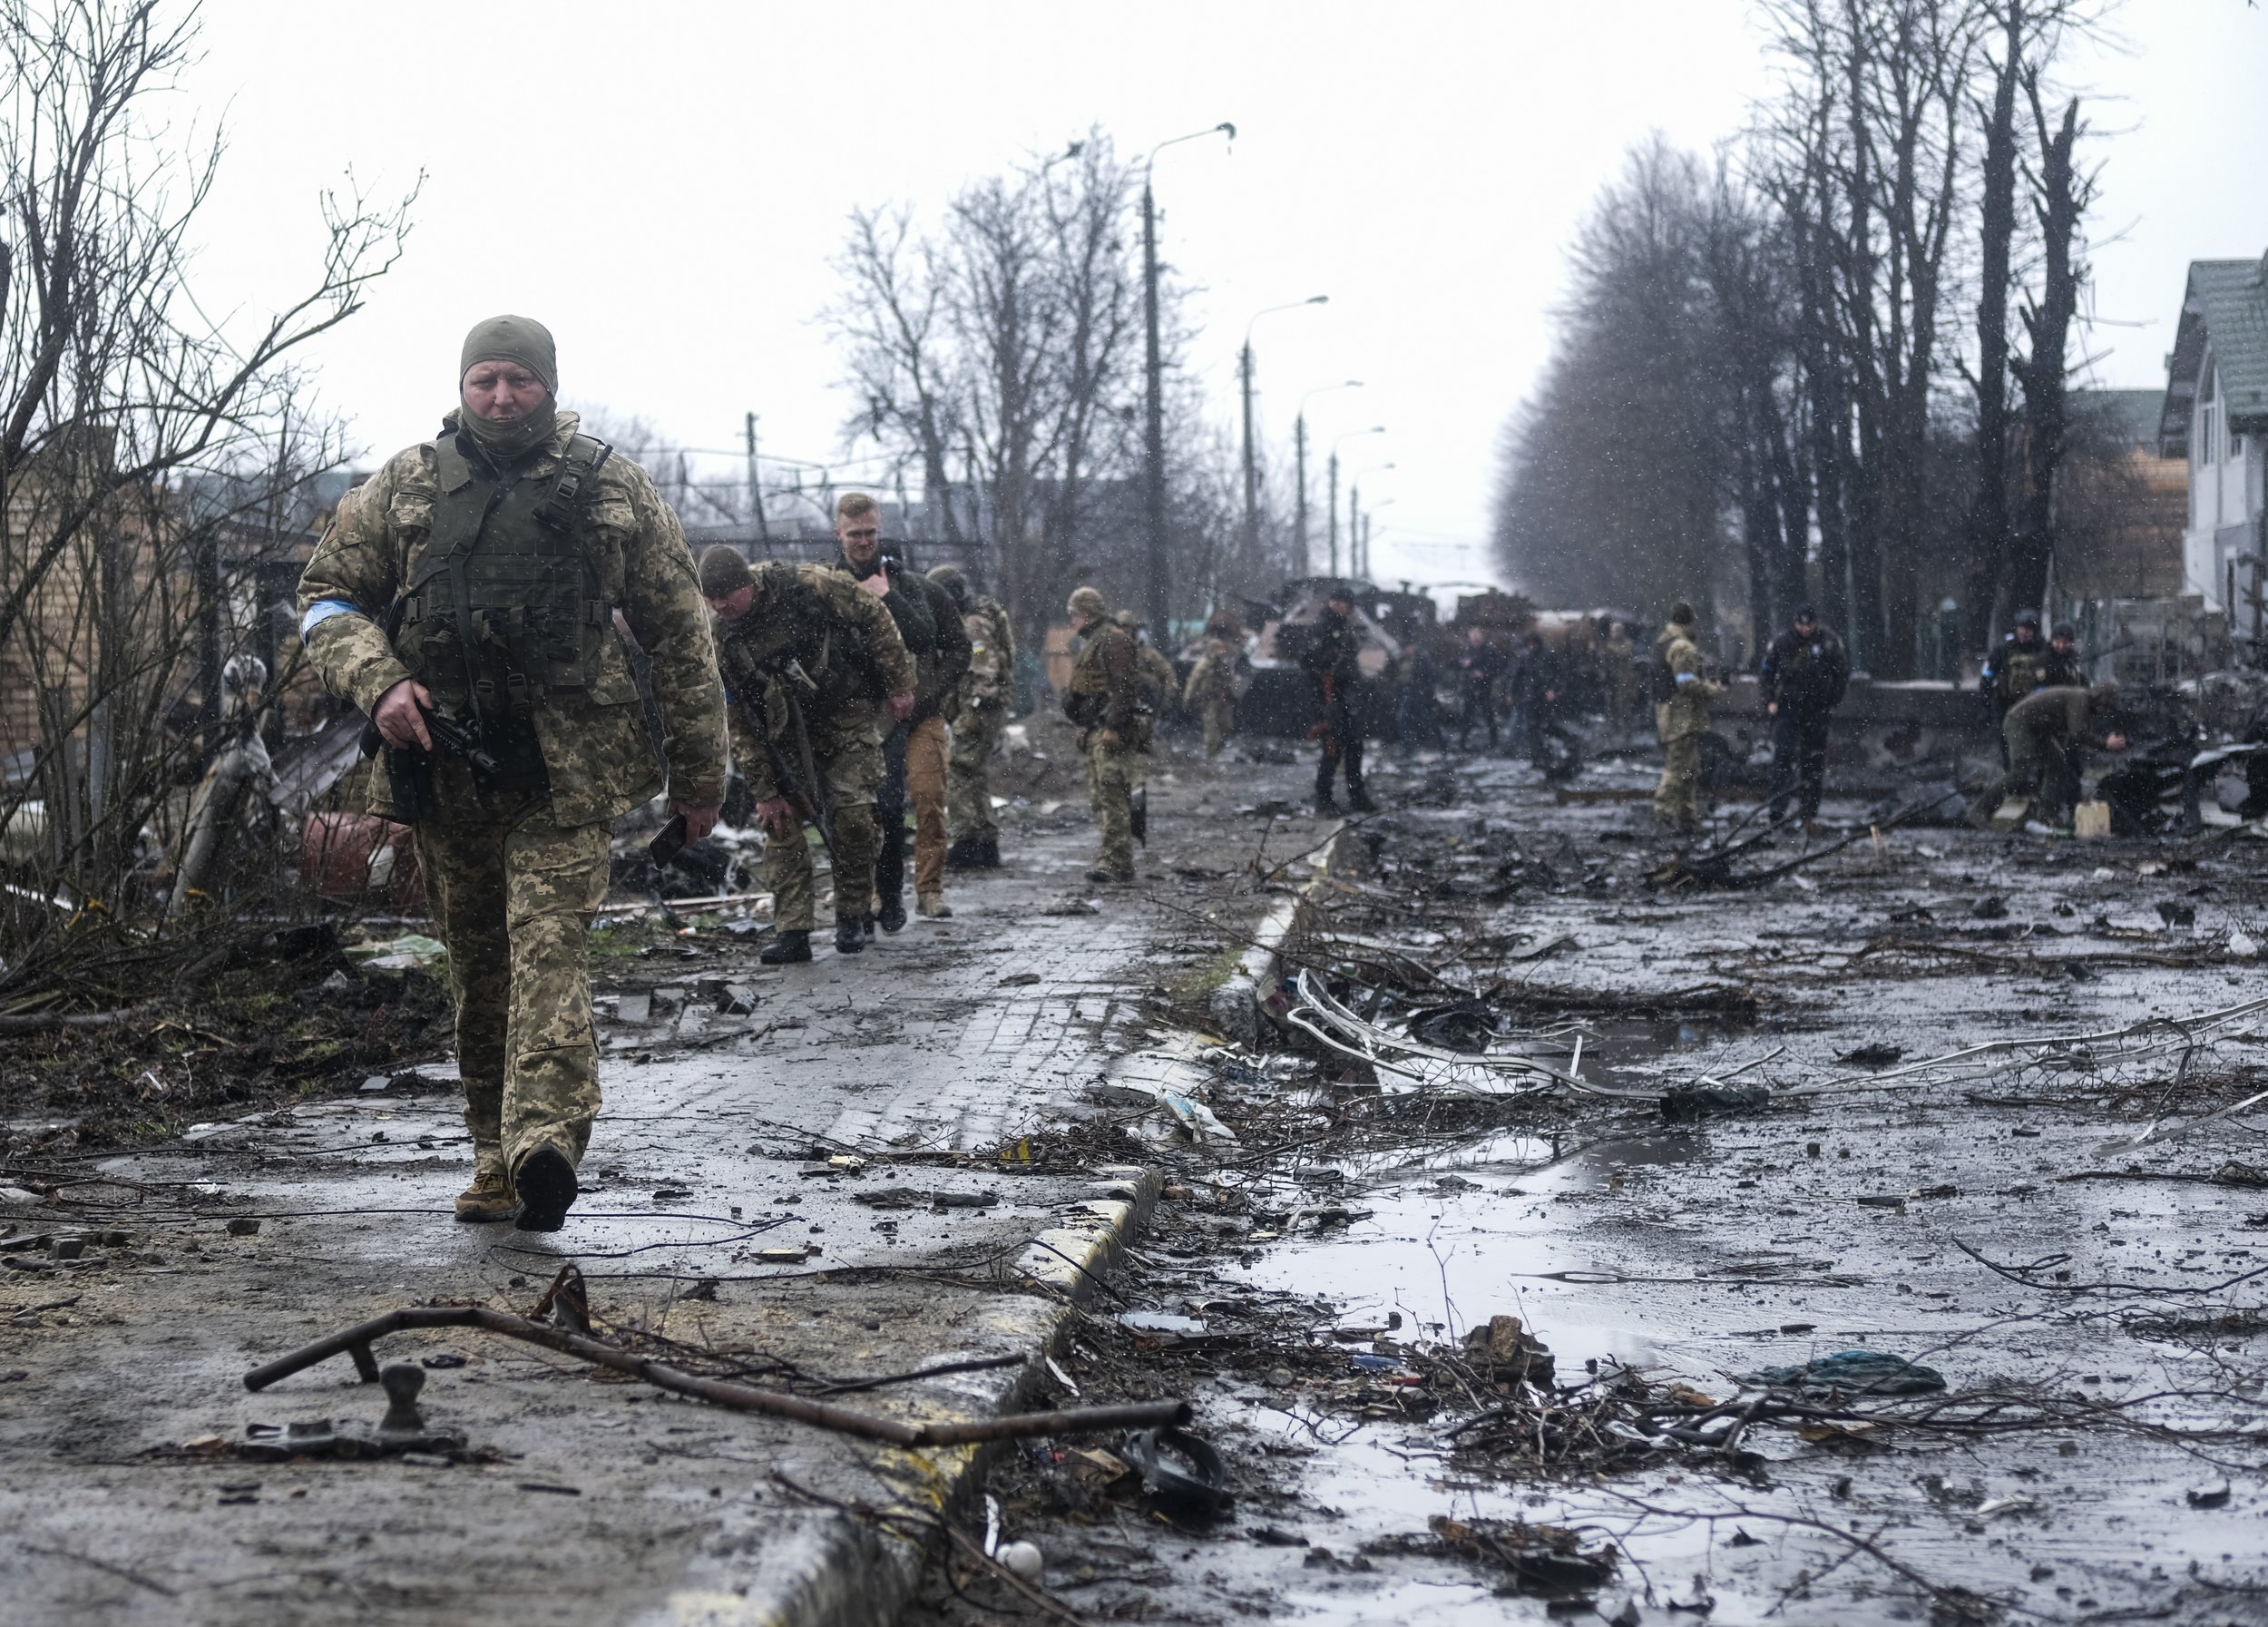  Ukrainian soldiers walk down a street in Bucha, Ukraine that has been annihilated and is crowded with dead Russian soldiers and destroyed armored vehicles on April 3, 2022. Bucha, a small village on the outskirts of Kyiv saw some of the fiercest fig